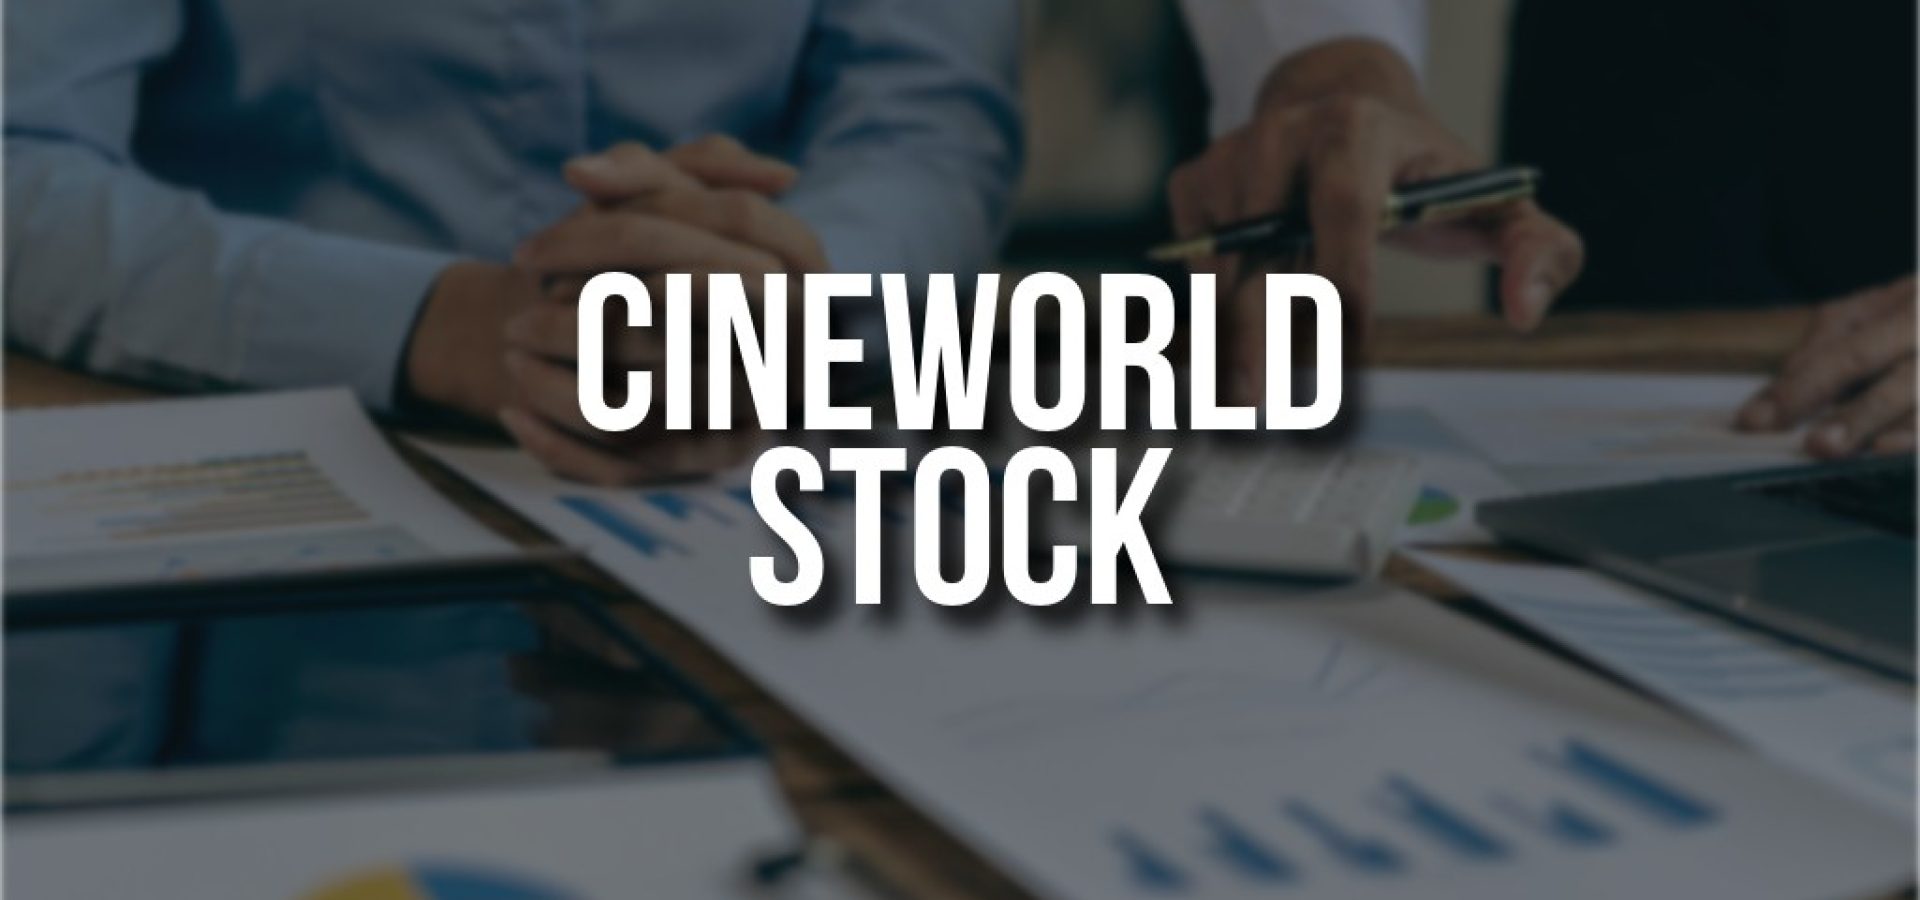 Cineworld stock: What is and How to buy it in the best way?